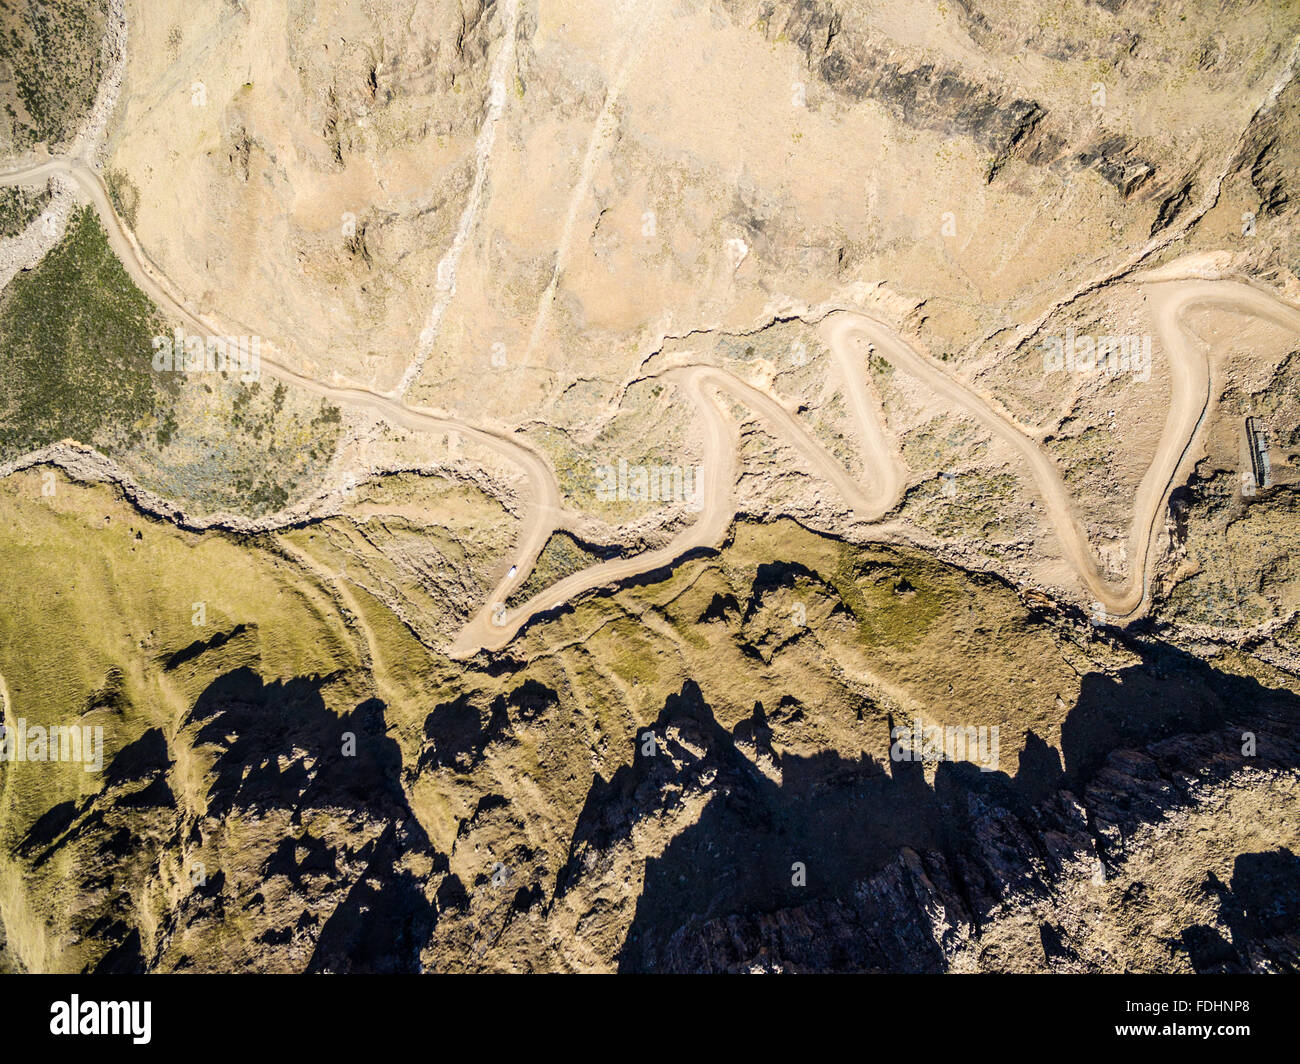 Aerial view of Dirt road and Sani River winding down the mountainside of Lesotho, Africa Stock Photo